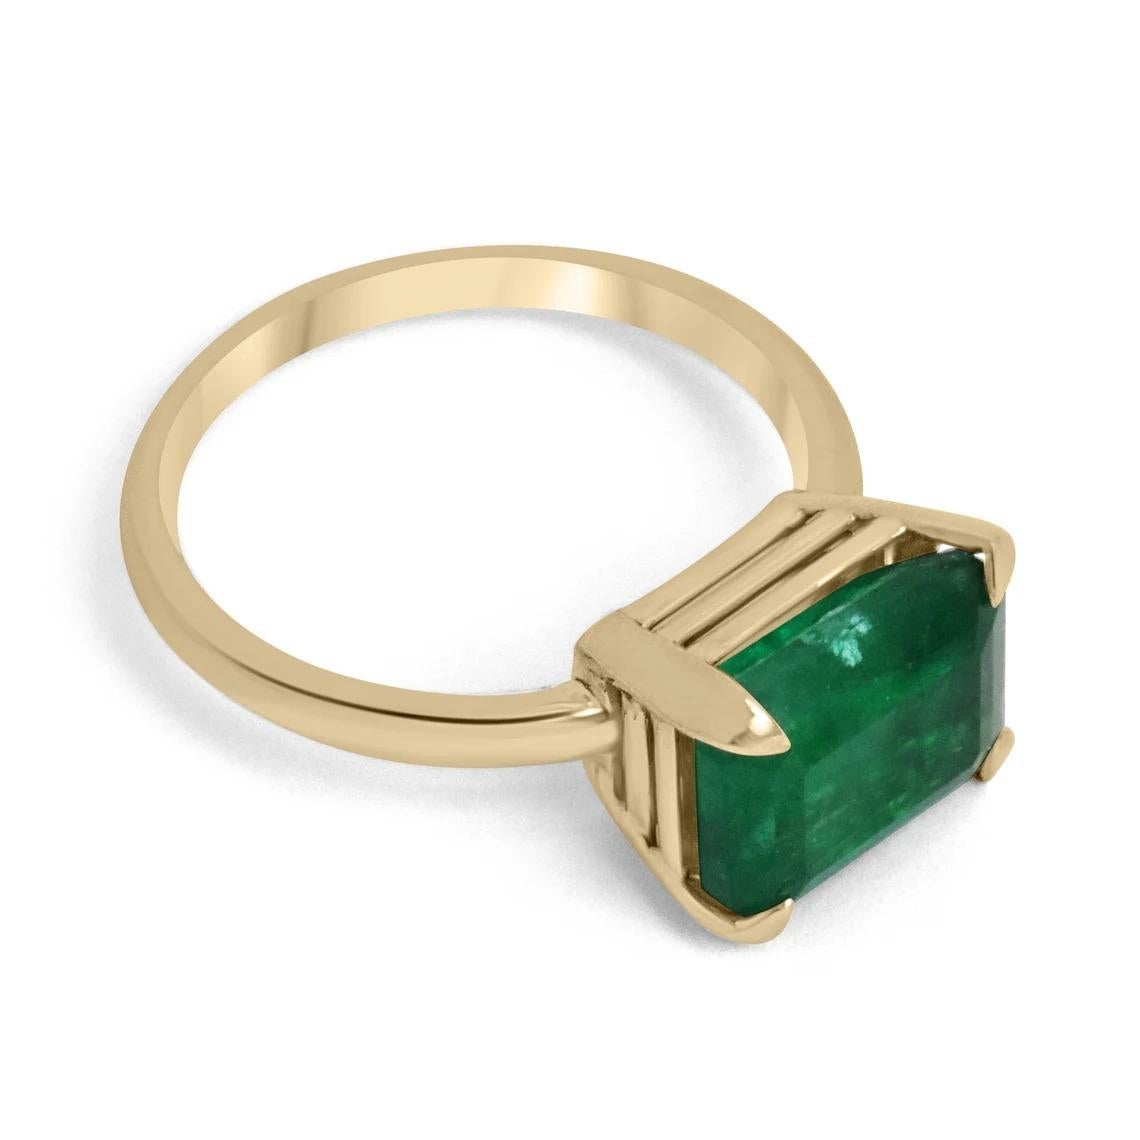 Displayed is a gorgeous emerald solitaire ring. This special piece features a remarkable, dark foresty green emerald cut emerald. The gemstone carries a hefty 4.50-carats of very good luster and clarity. Handset east to west in a custom four-prong